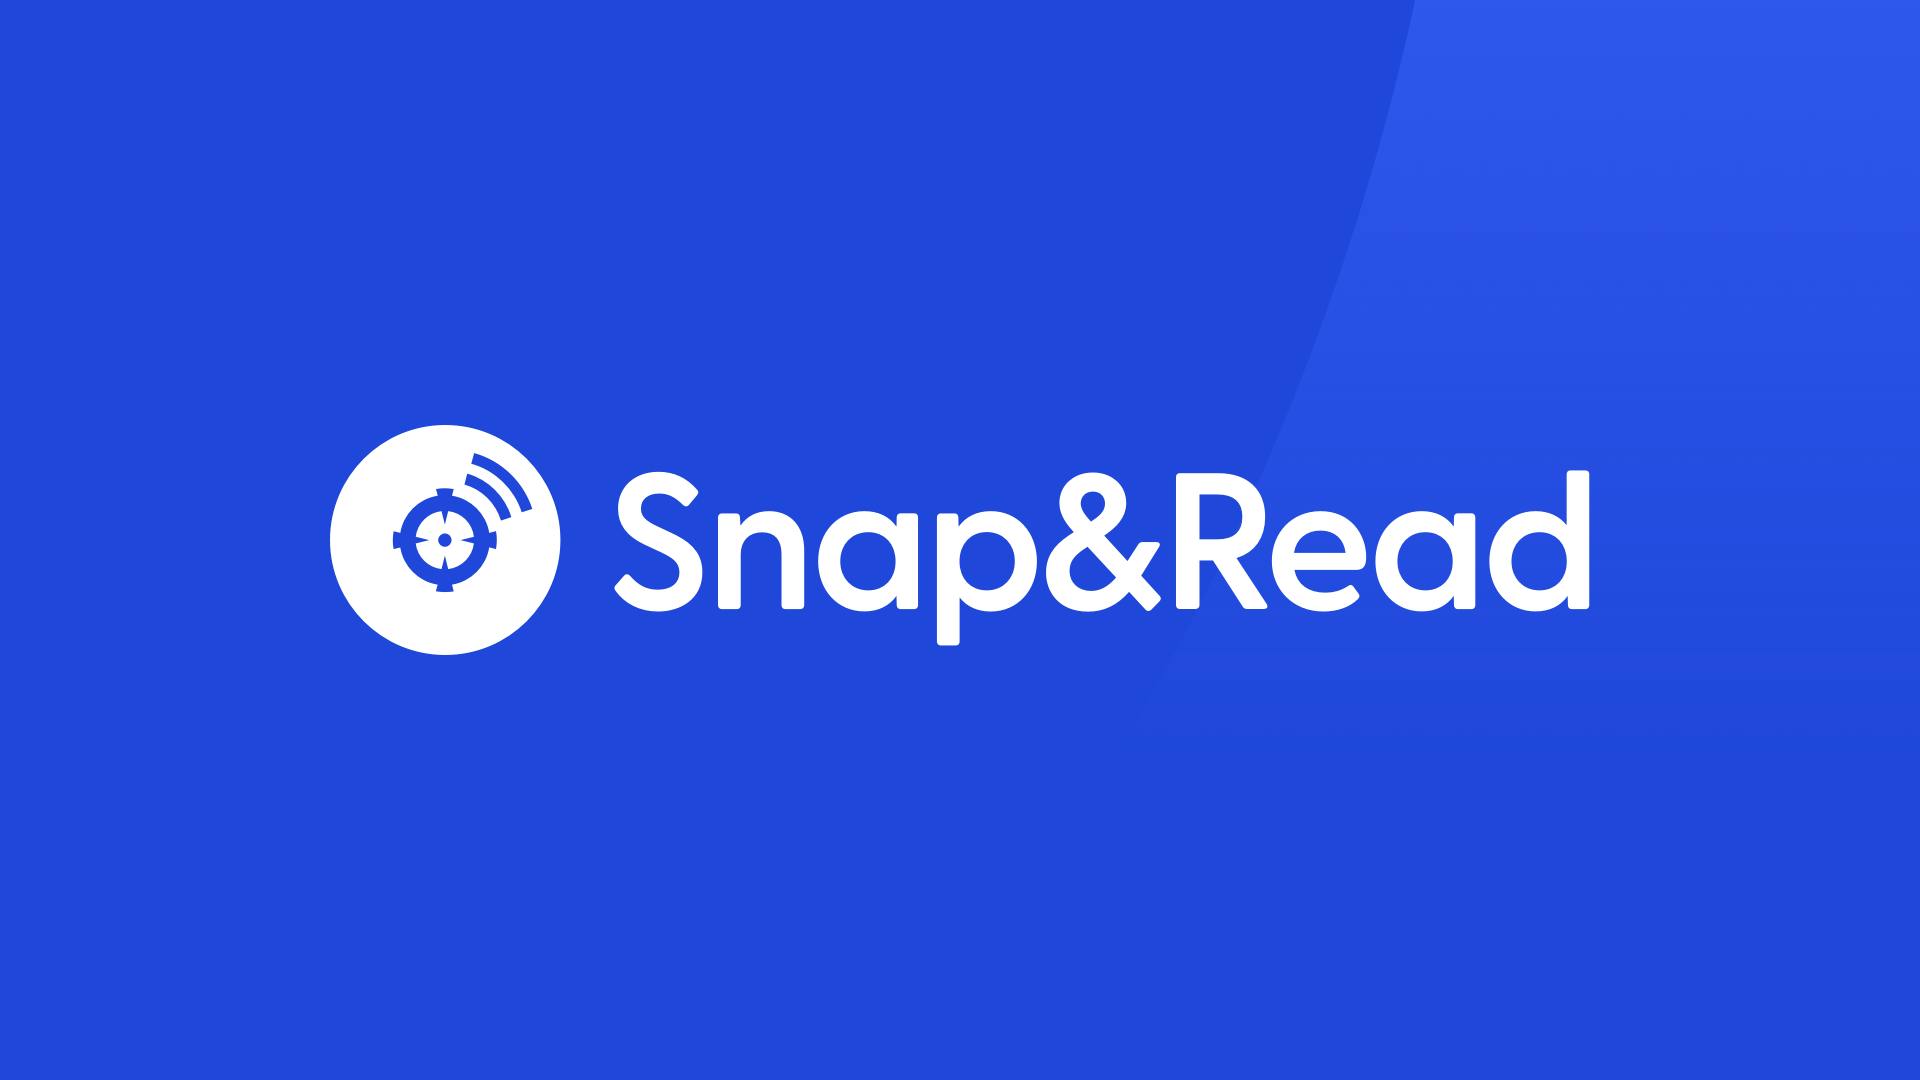 Snap&Read logo on a blue background